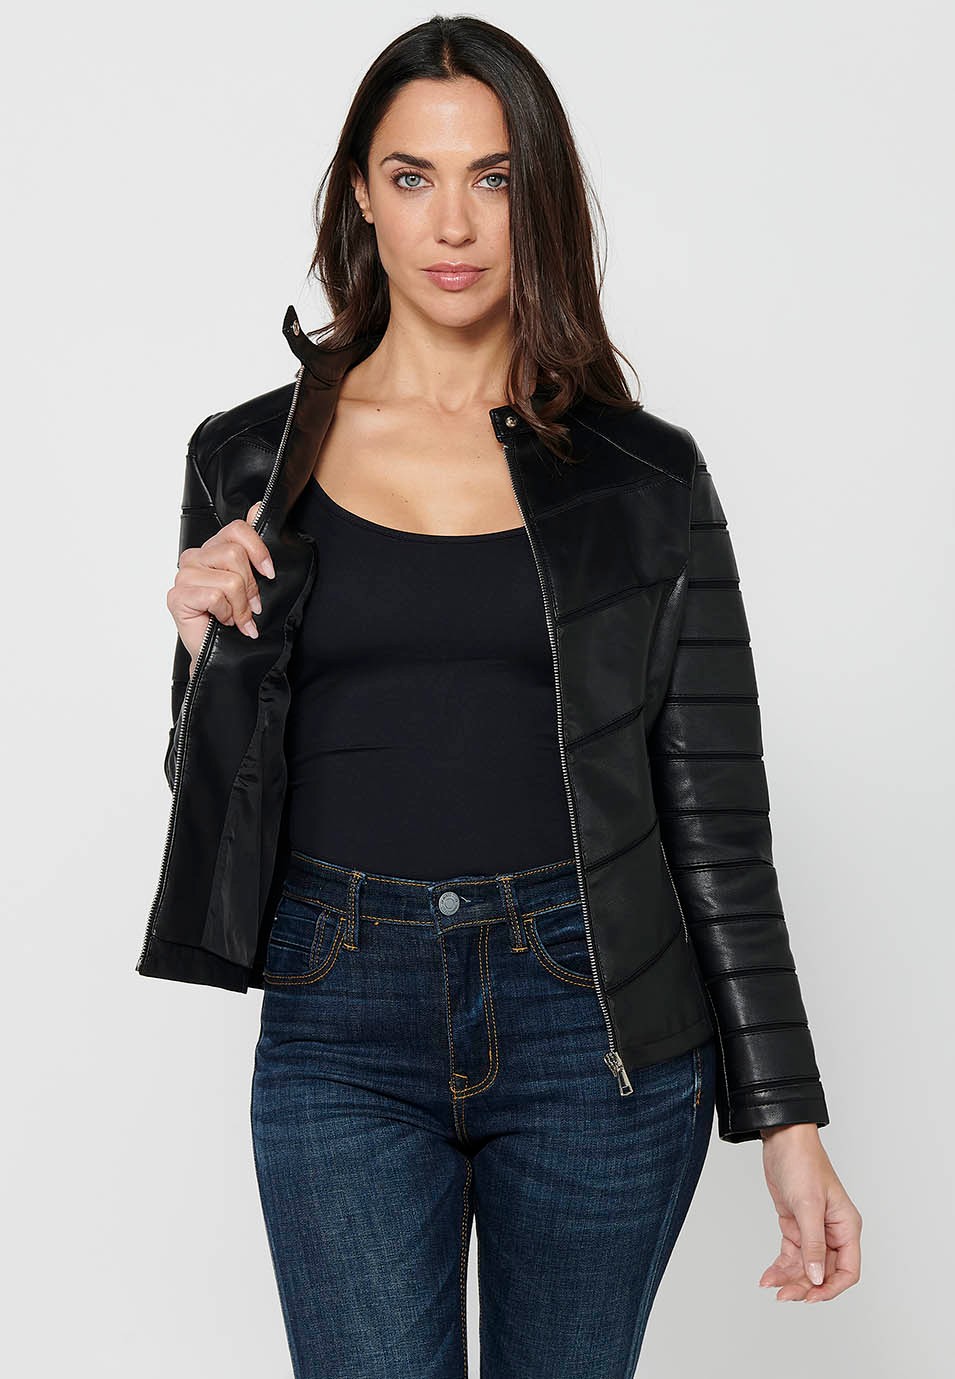 Long-sleeved leather-effect jacket with round neck and cut details. Black Zipper Front Closure for Women